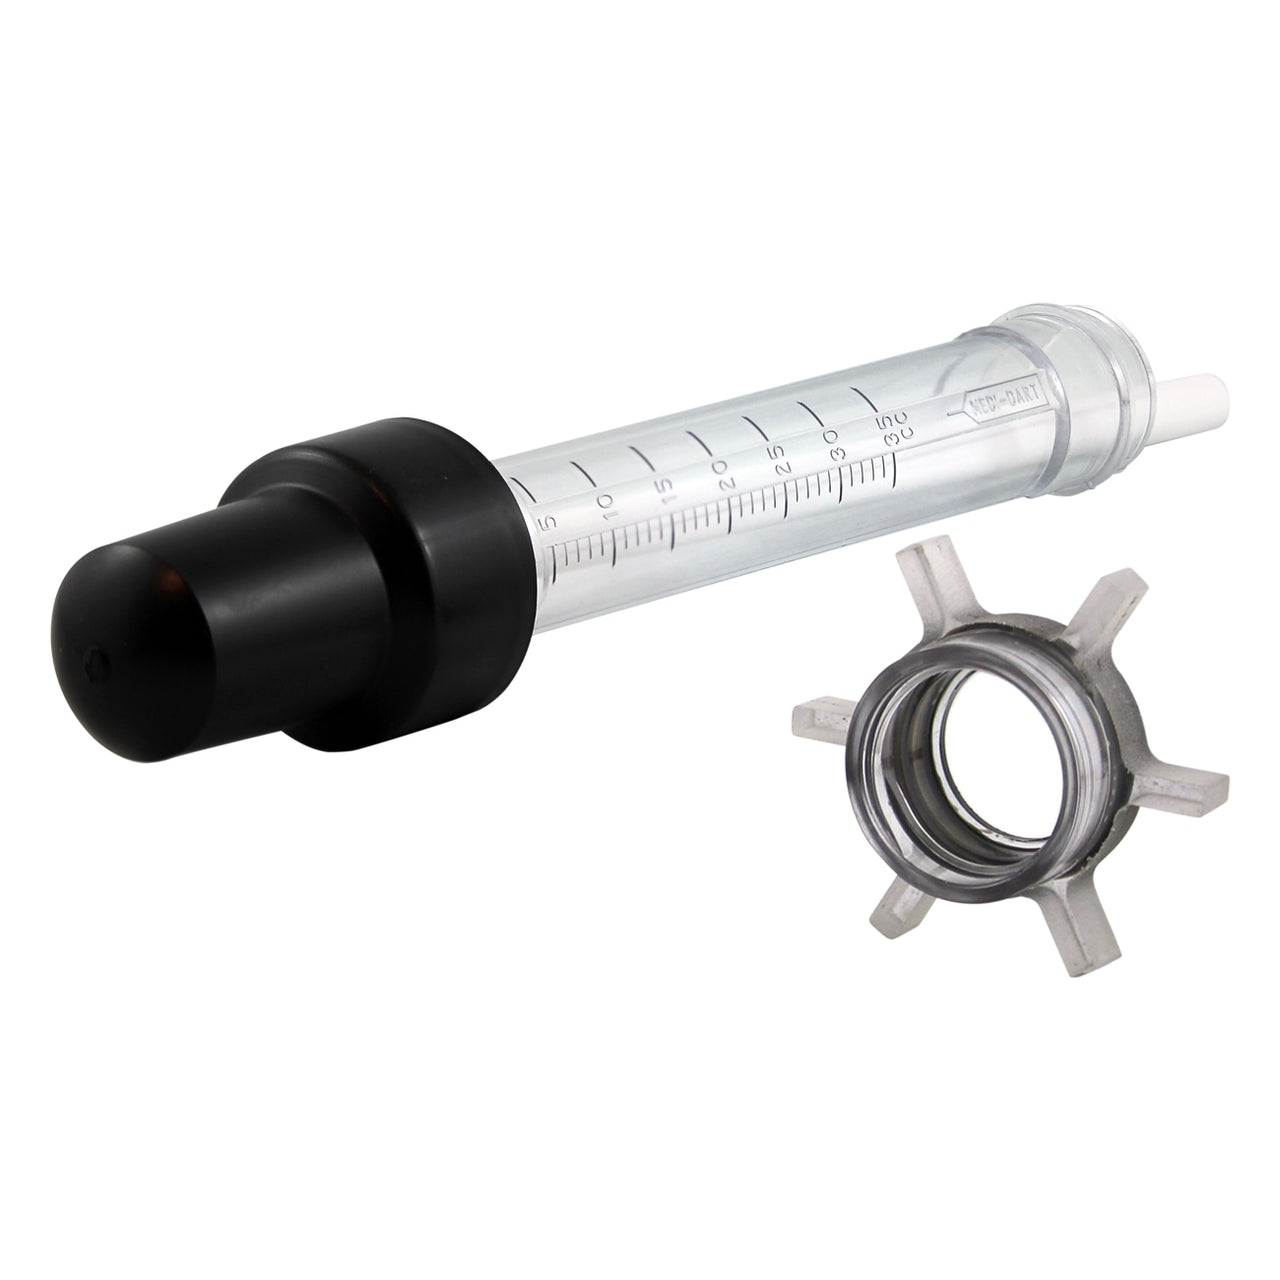 Medi-Dart Extension Syringe -No Tail Section (Mdsac) - Crossbow Medi-Dart Injection System Medi-Dart - Canada